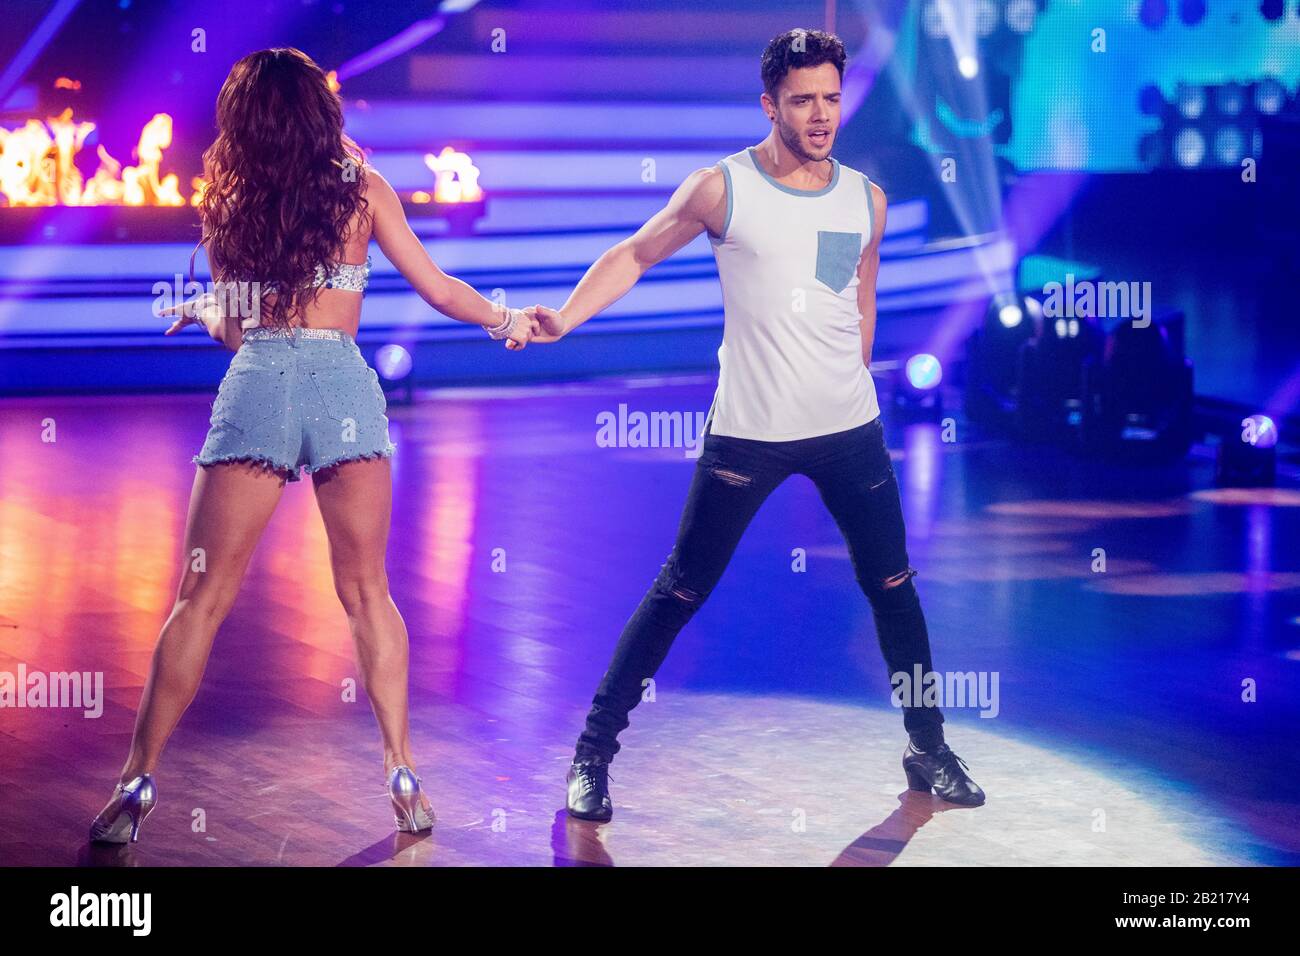 Cologne, Germany. 28th Feb, 2020. Luca Hänni, singer, and Christina Luft,  professional dancer, dance in the RTL dance show "Let's Dance" at the  Coloneum. Credit: Rolf Vennenbernd/dpa/Alamy Live News Stock Photo -